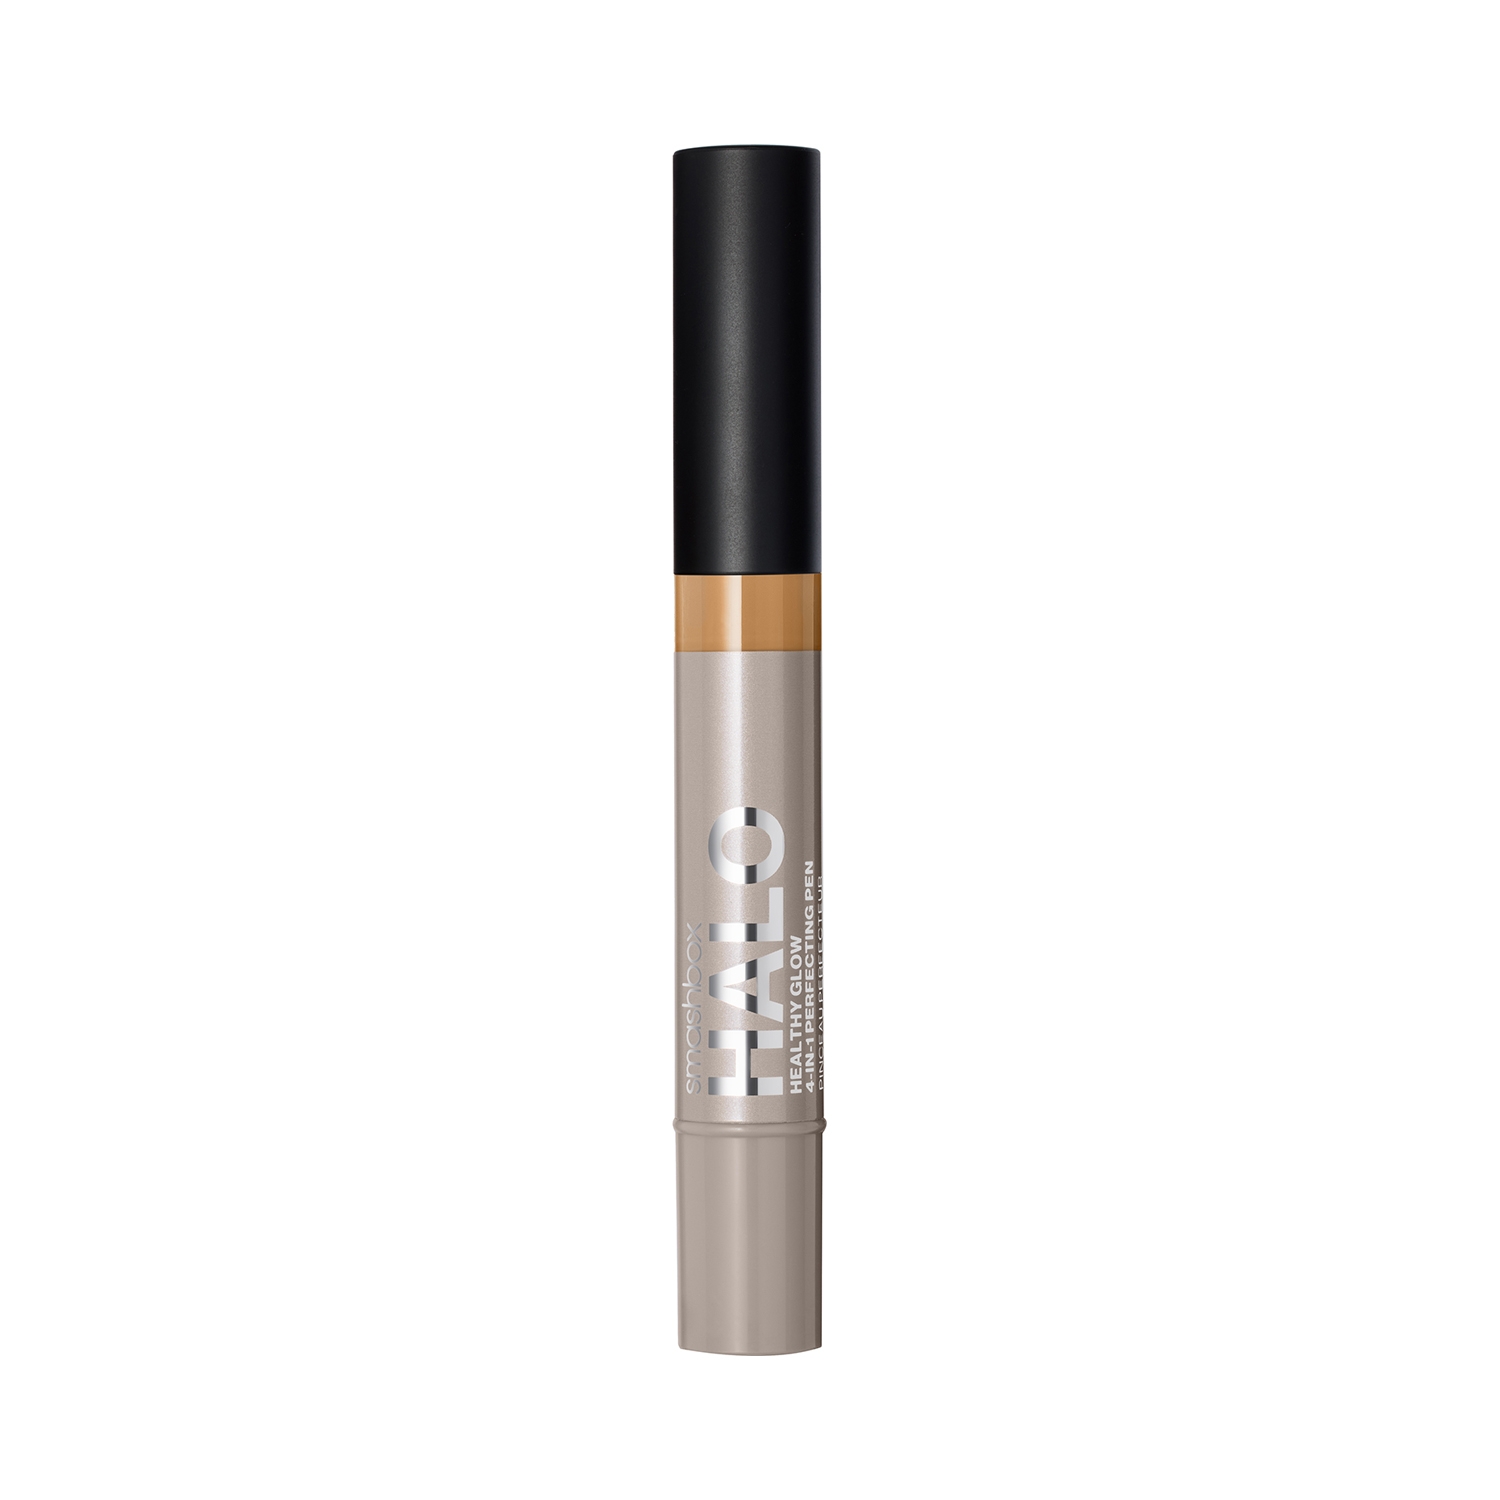 Smashbox | Smashbox Halo Healthy Glow 4-In-1 Perfecting Concealer Pen - M10W (3.5ml)